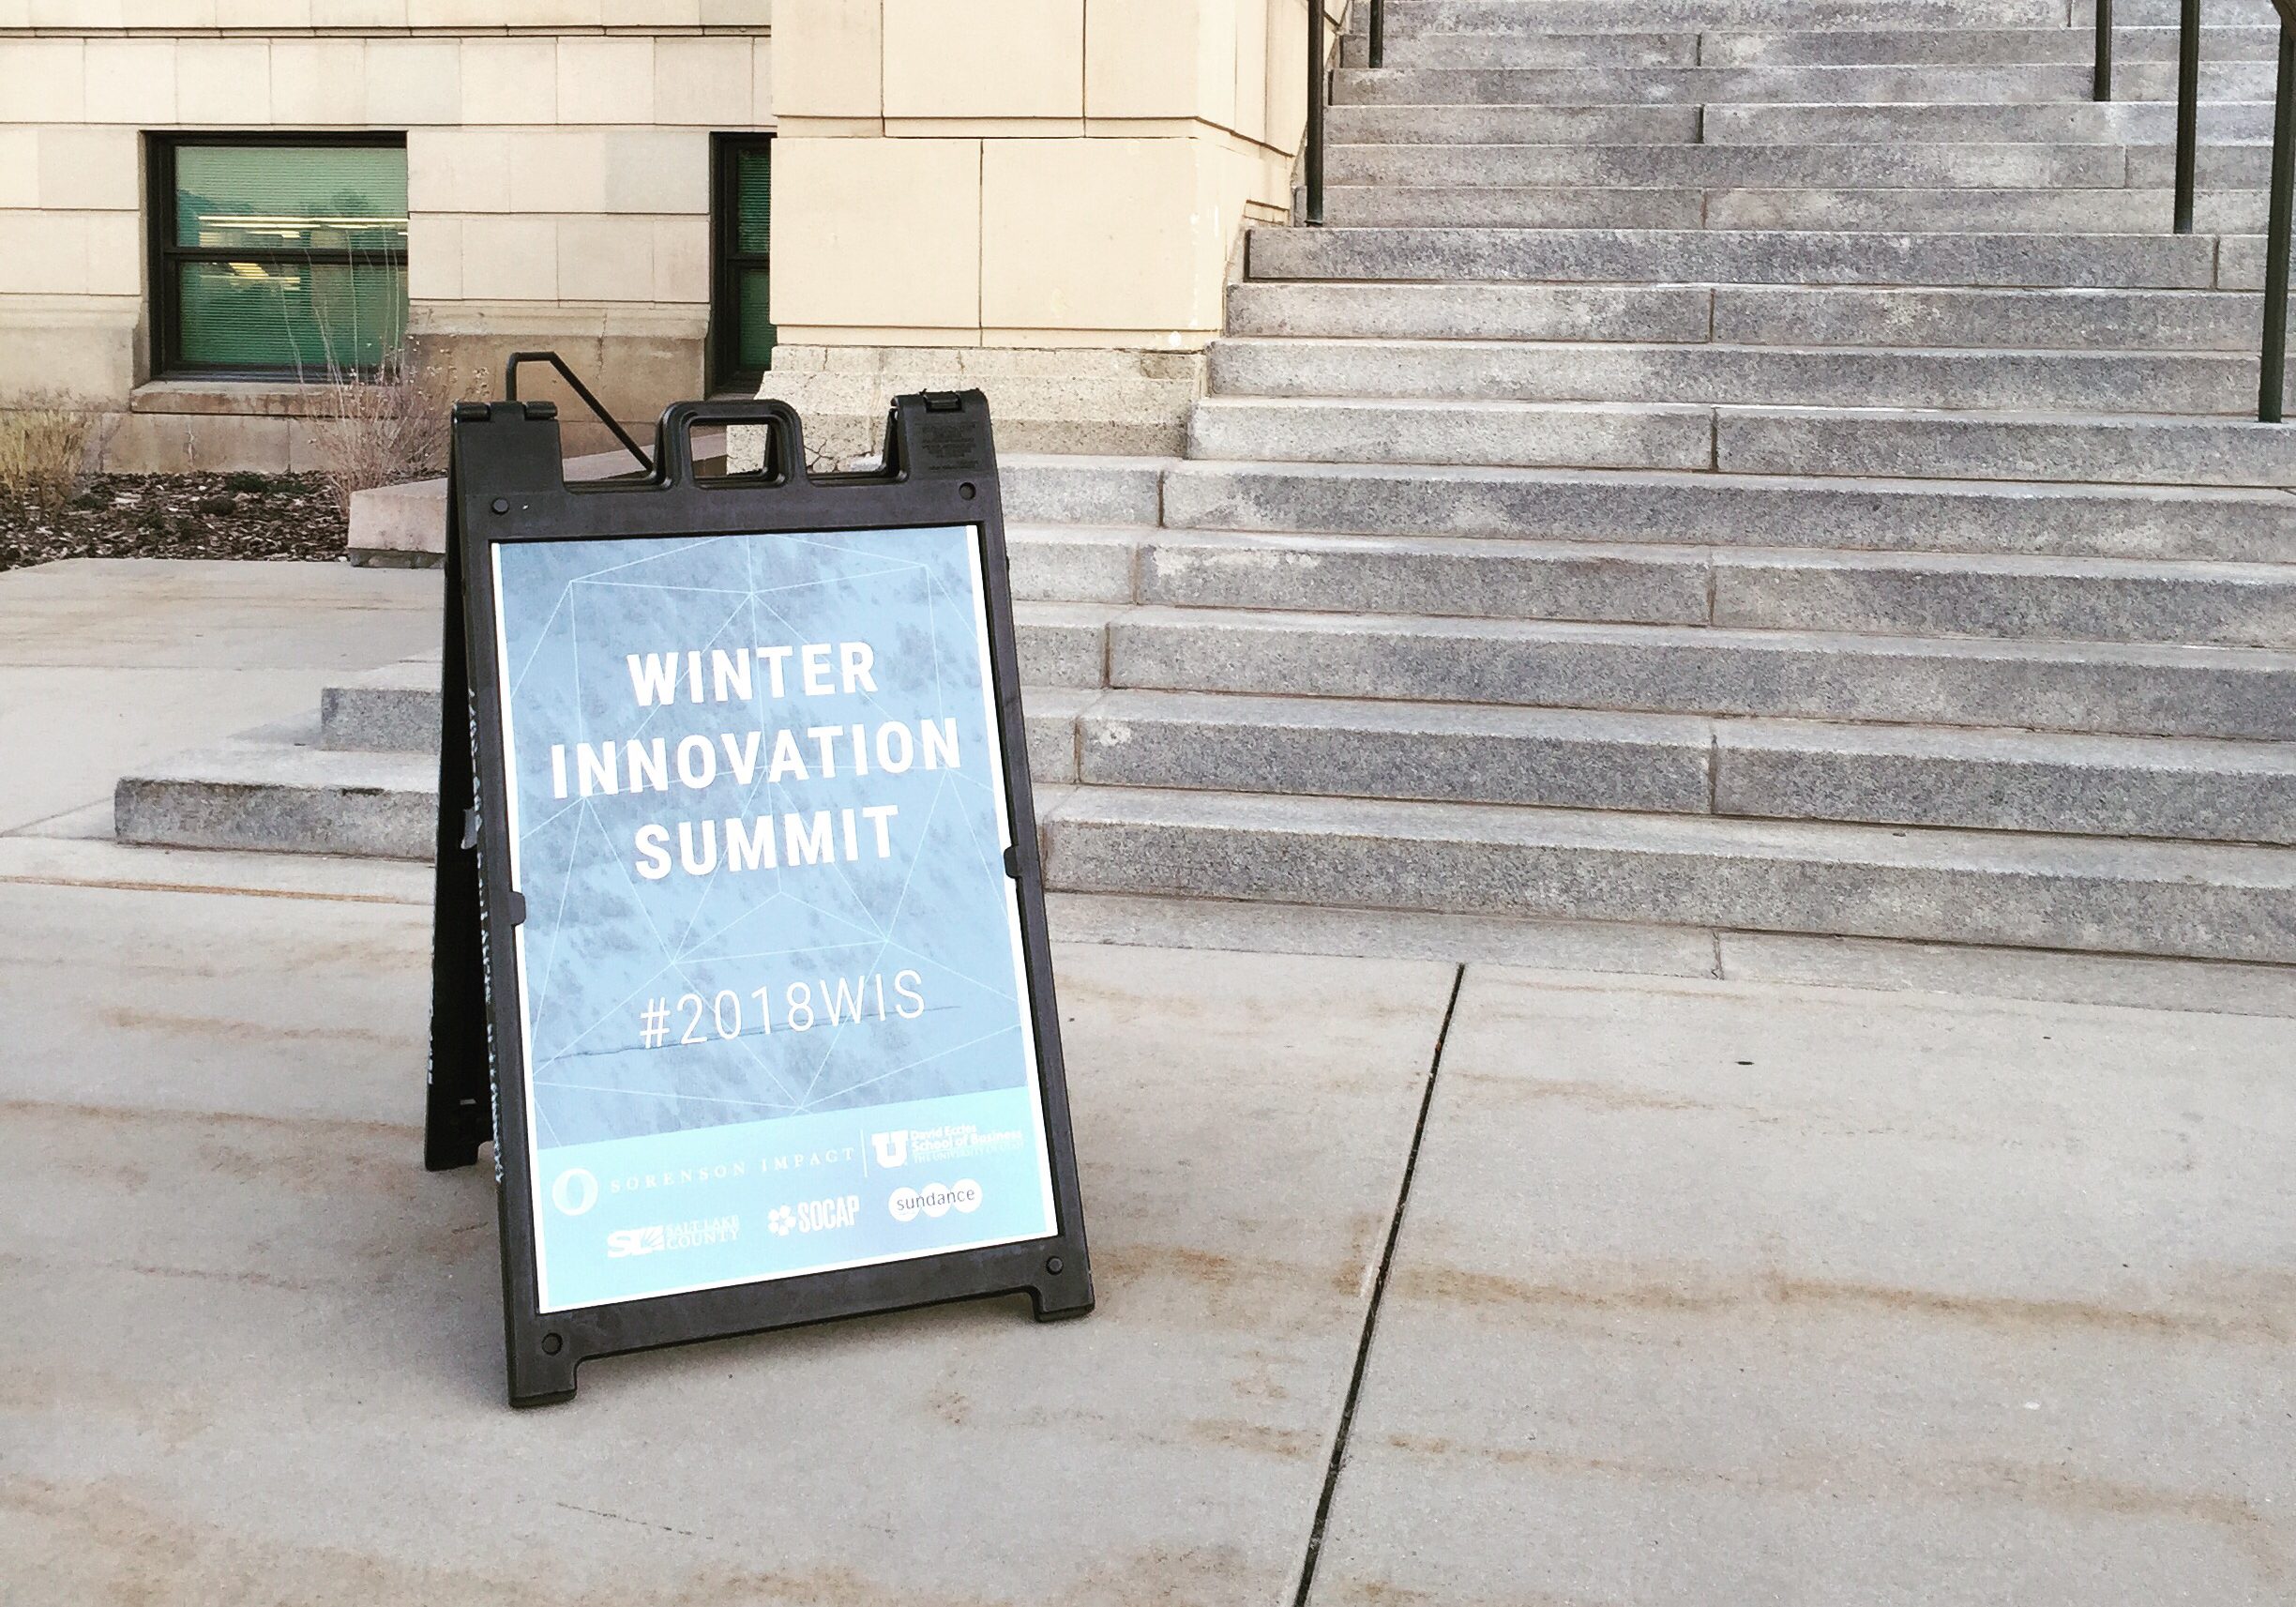 We had a fantastic first day at the Winter Innovation Summit with Sorenson Impact! Here are some of the highlights.